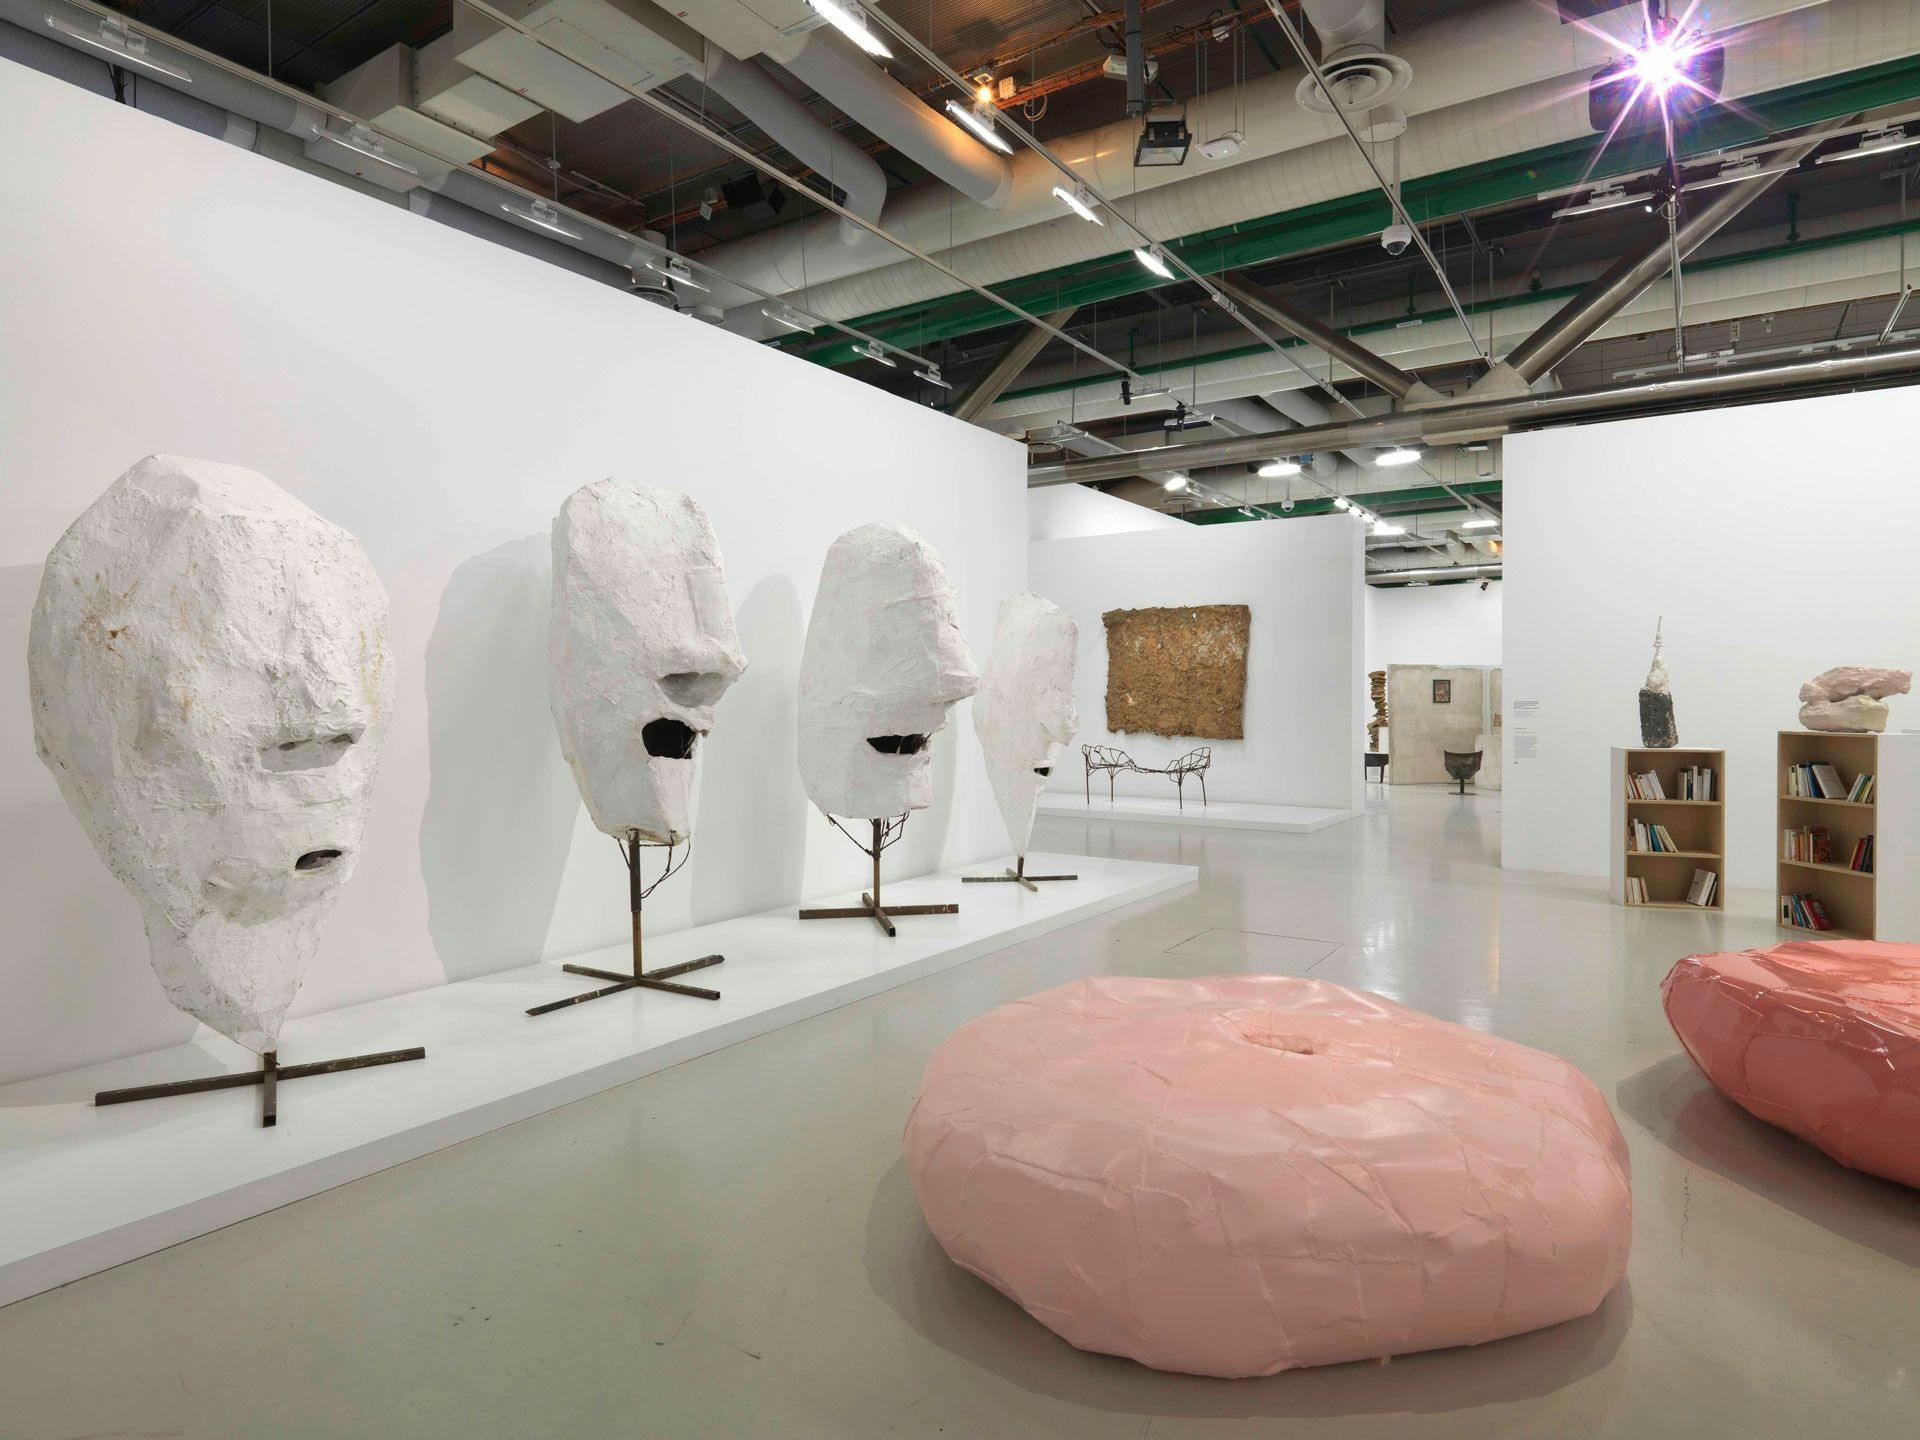 Installation view of the exhibition Franz West, at the Centre Georges Pompidou, Paris, dated 2018.